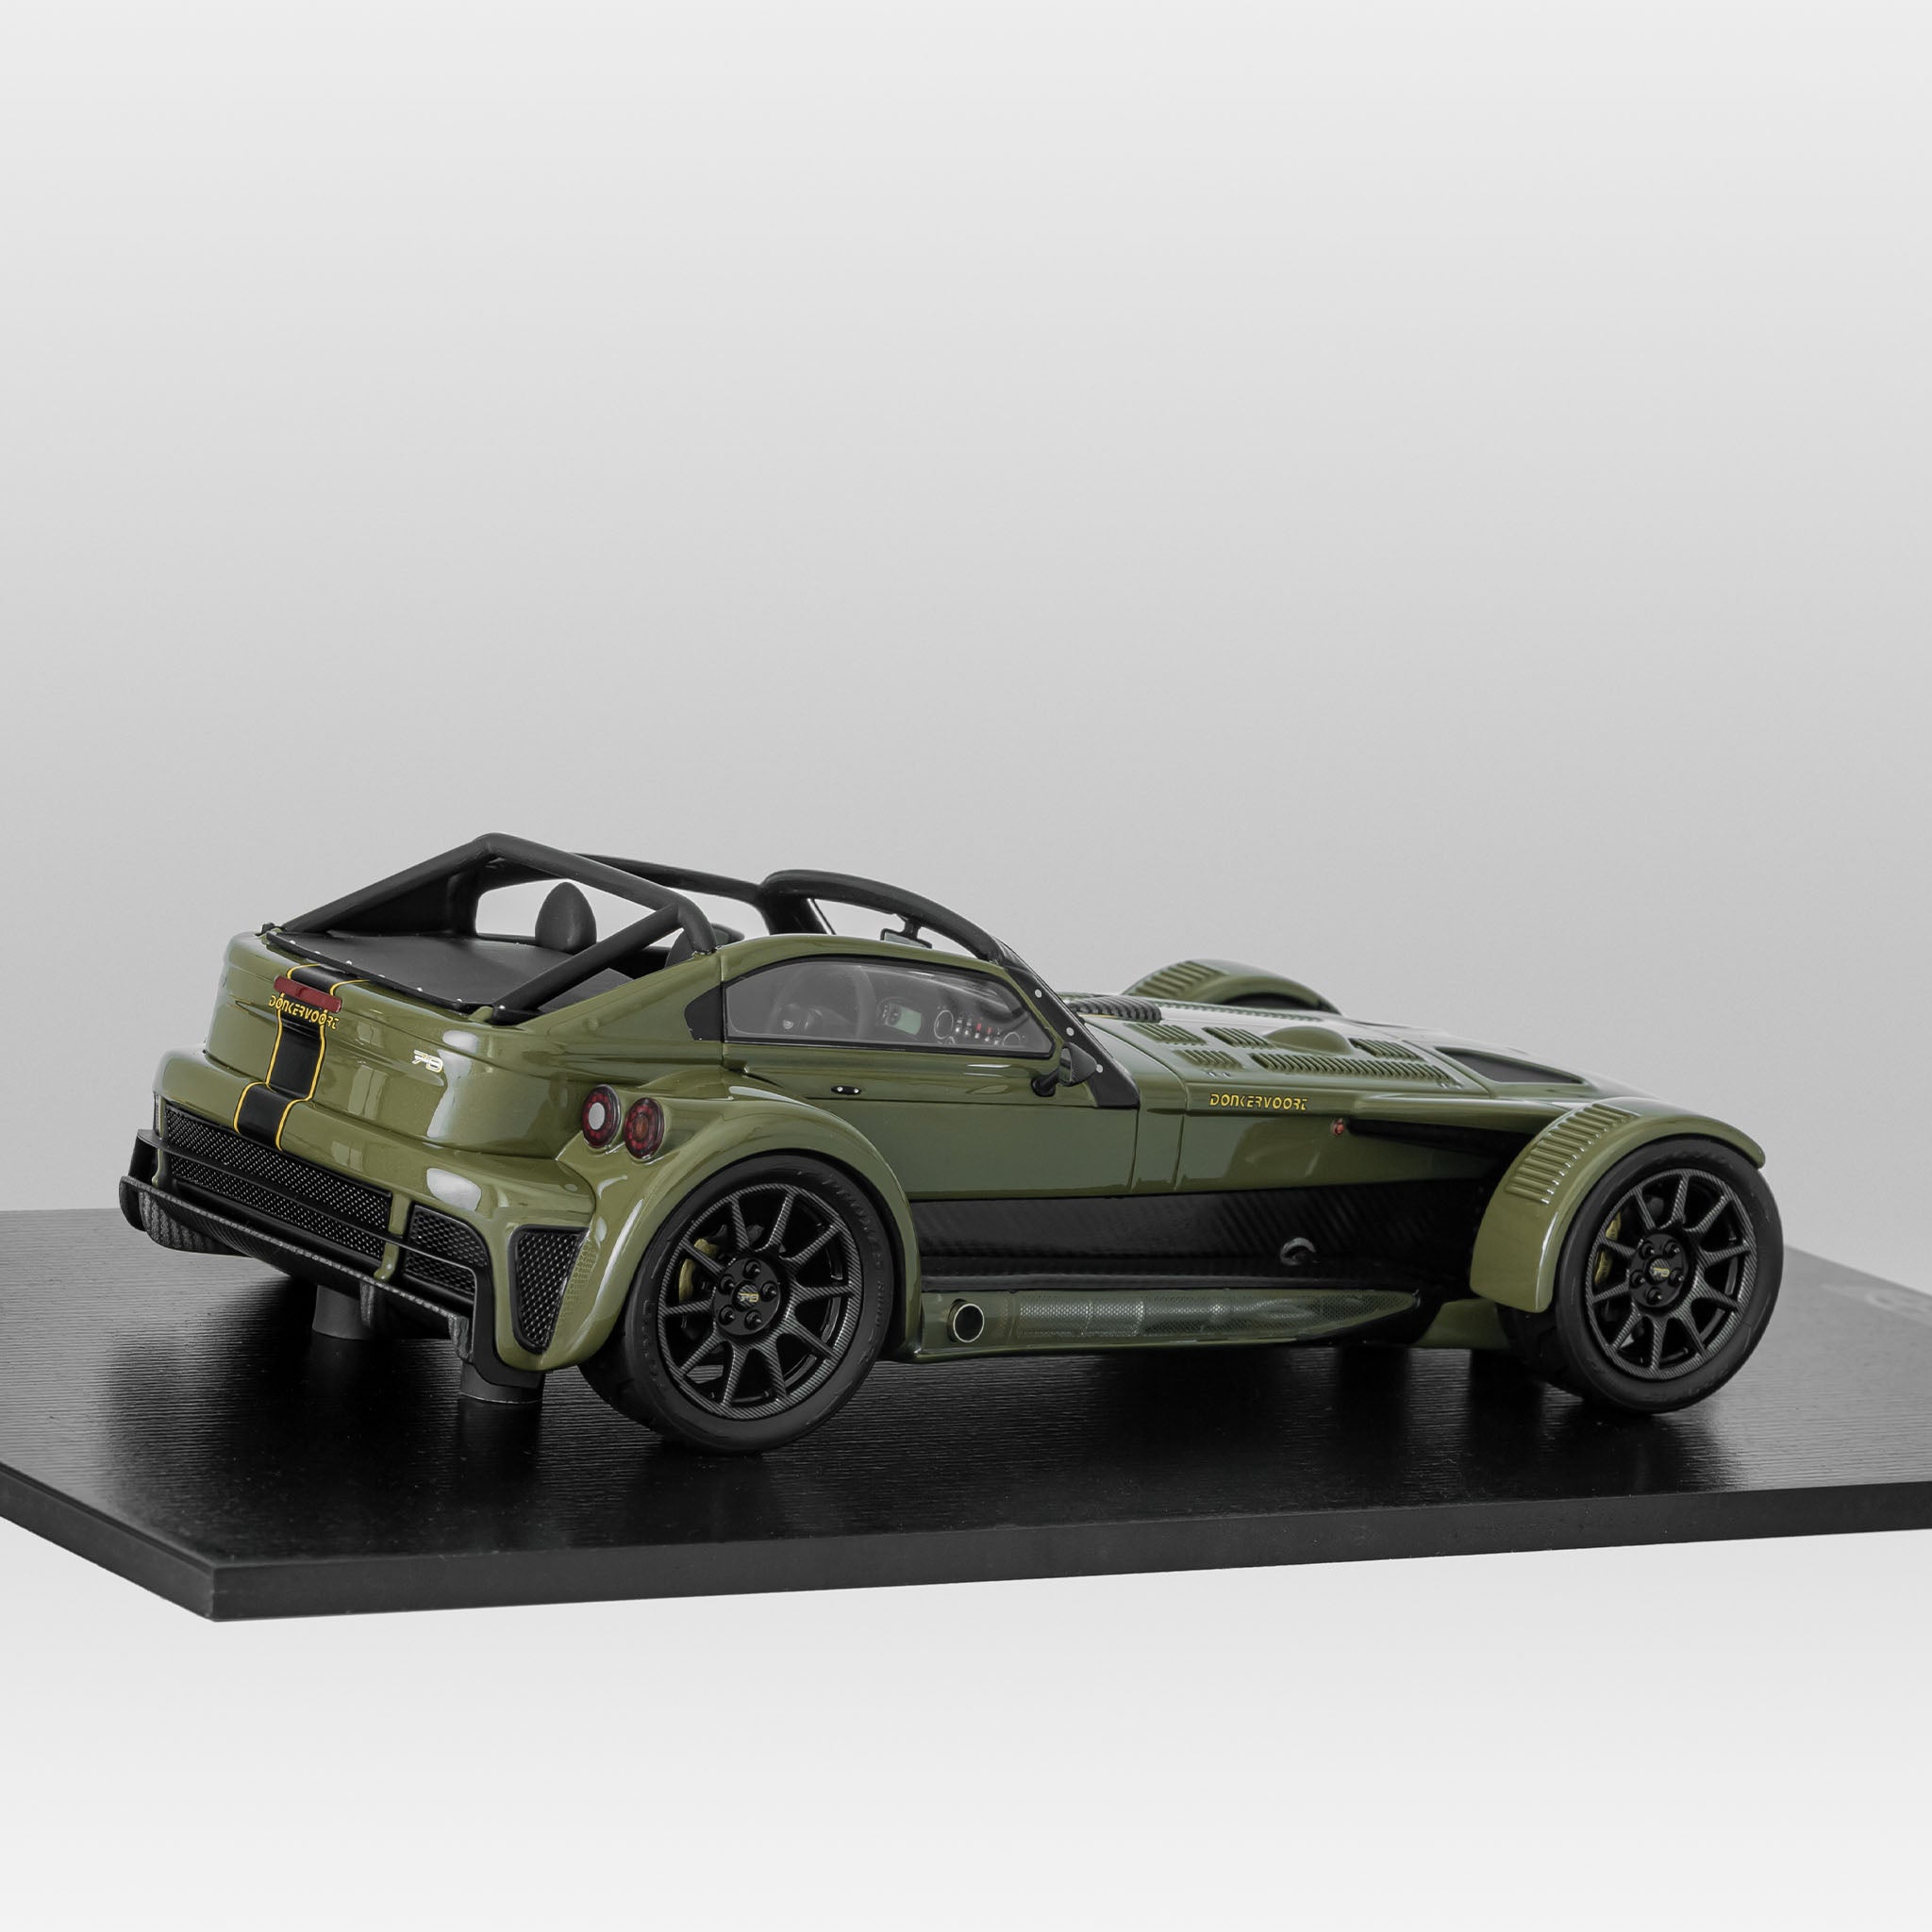 Donkervoort D8 GTO-JD70 1:18 // Green